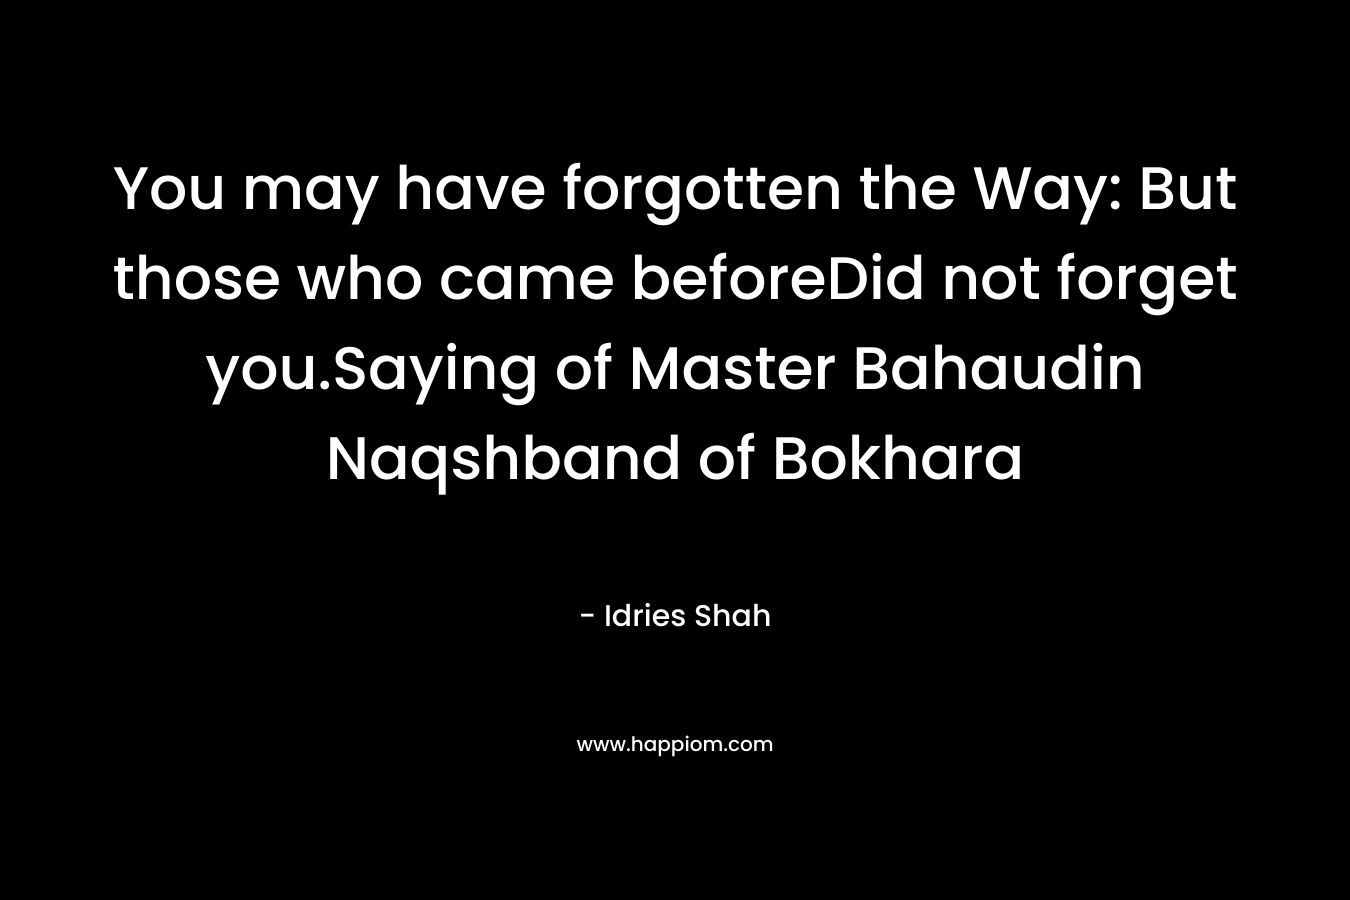 You may have forgotten the Way: But those who came beforeDid not forget you.Saying of Master Bahaudin Naqshband of Bokhara – Idries Shah